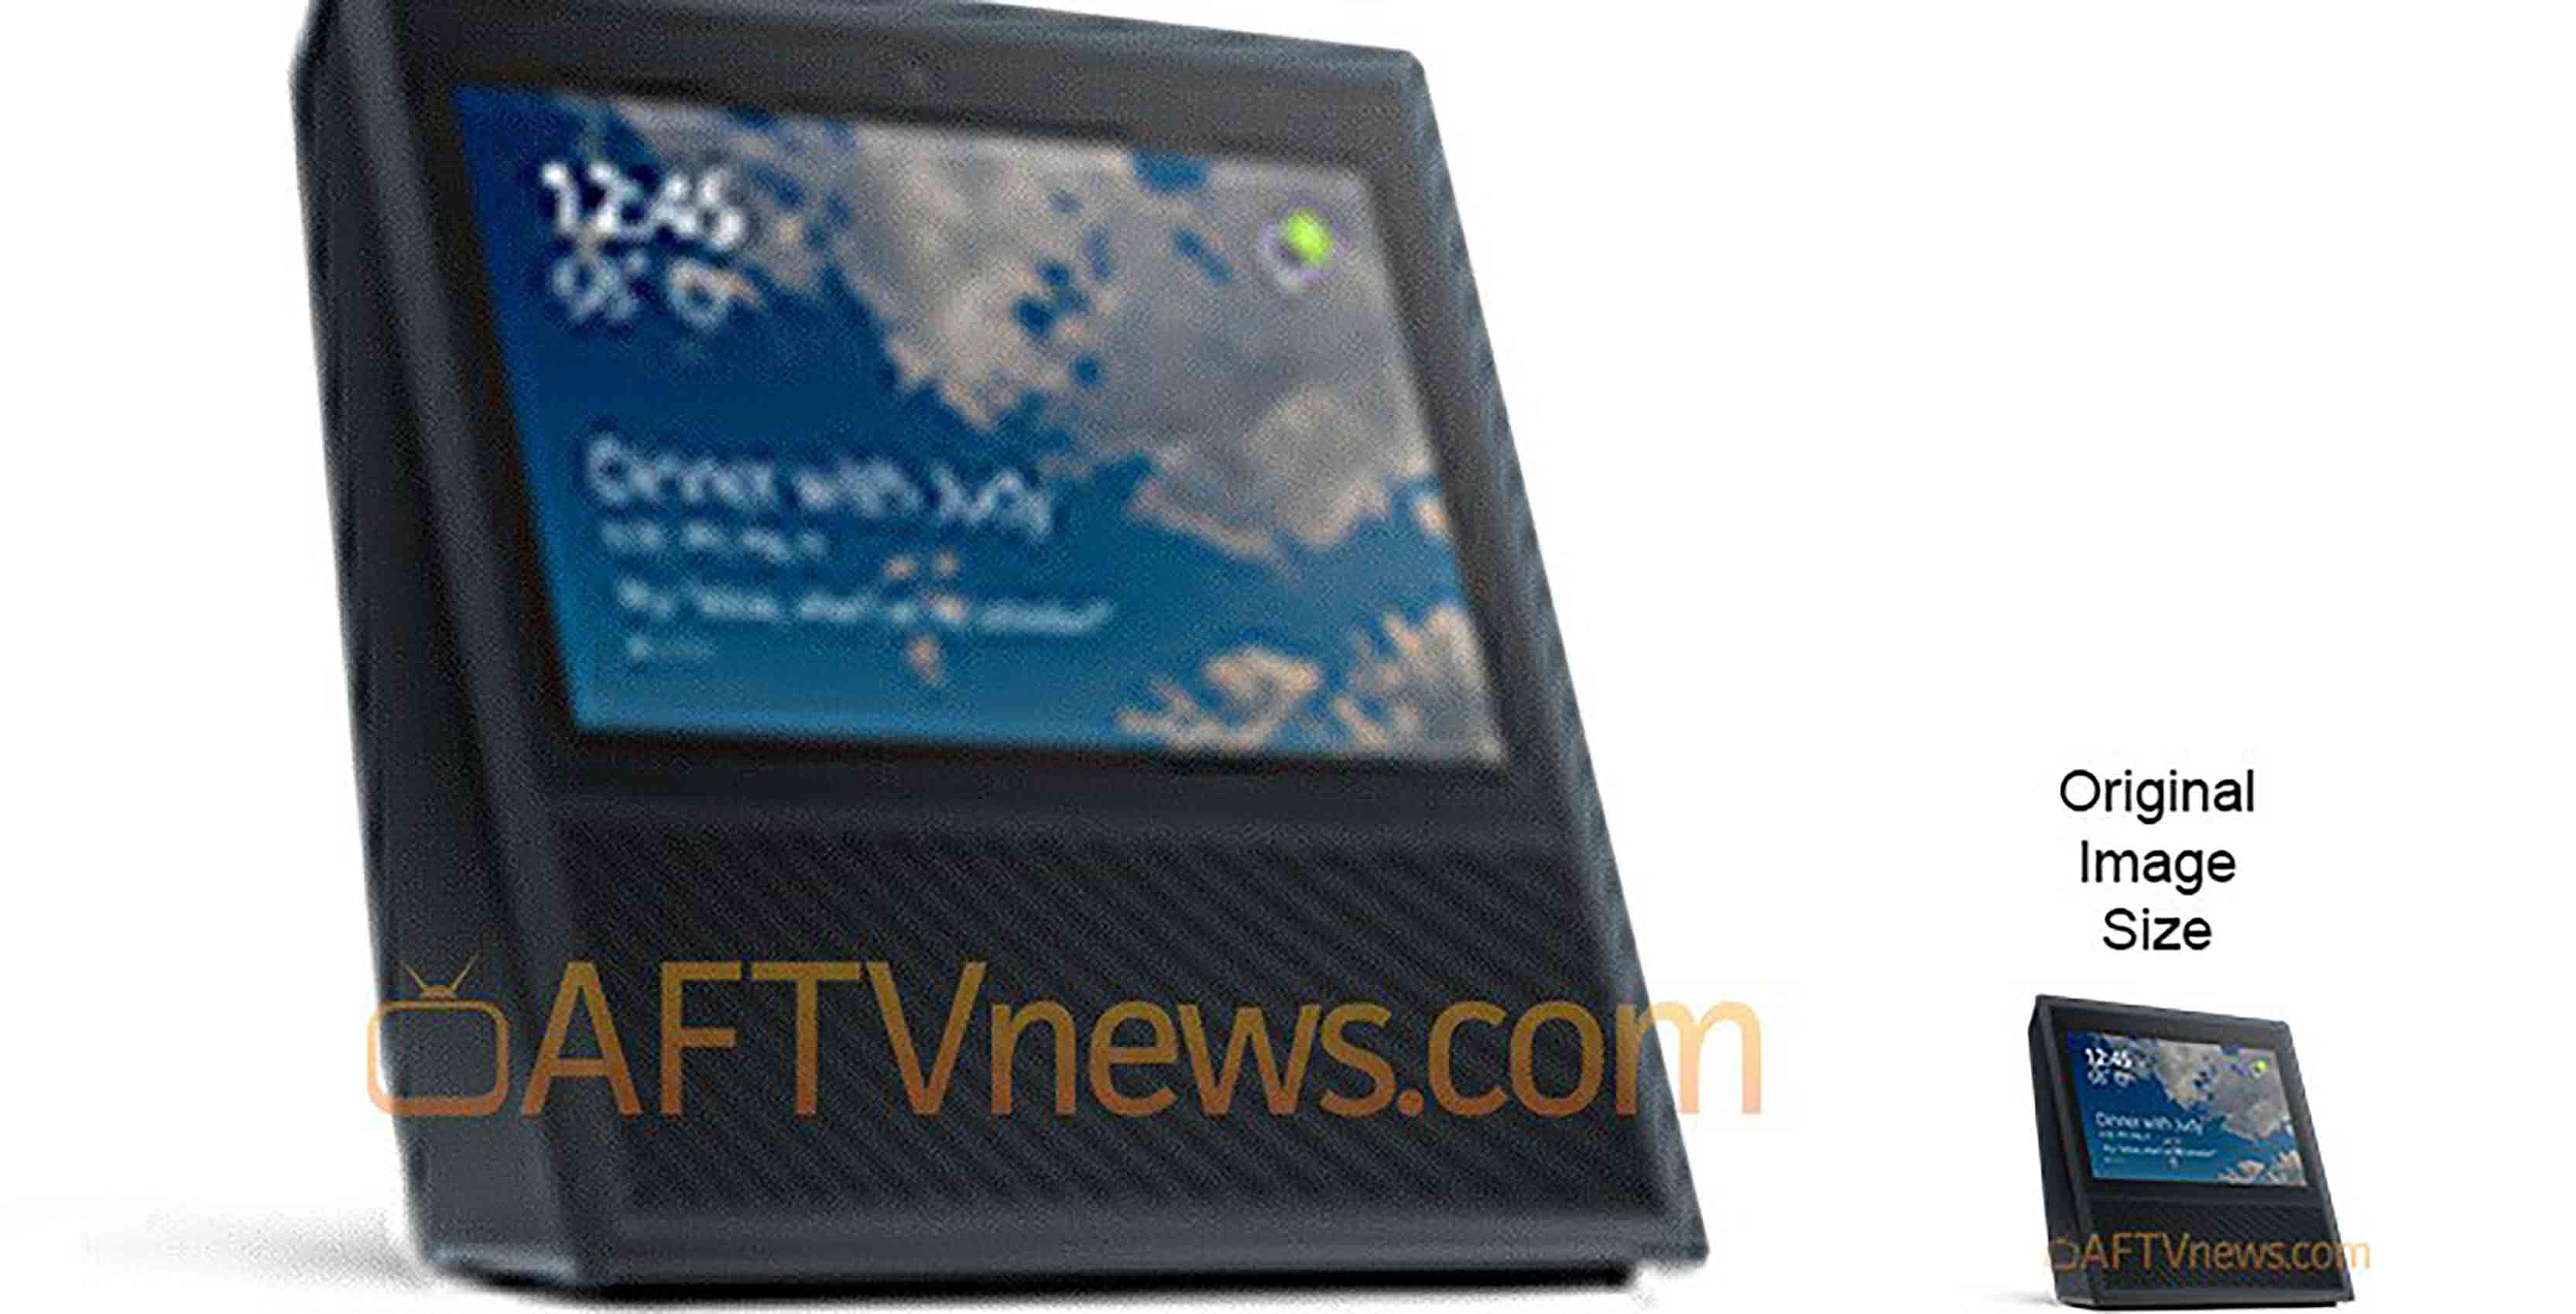 Leaked look at Amazon Echo with touchscreen from Aftvnews